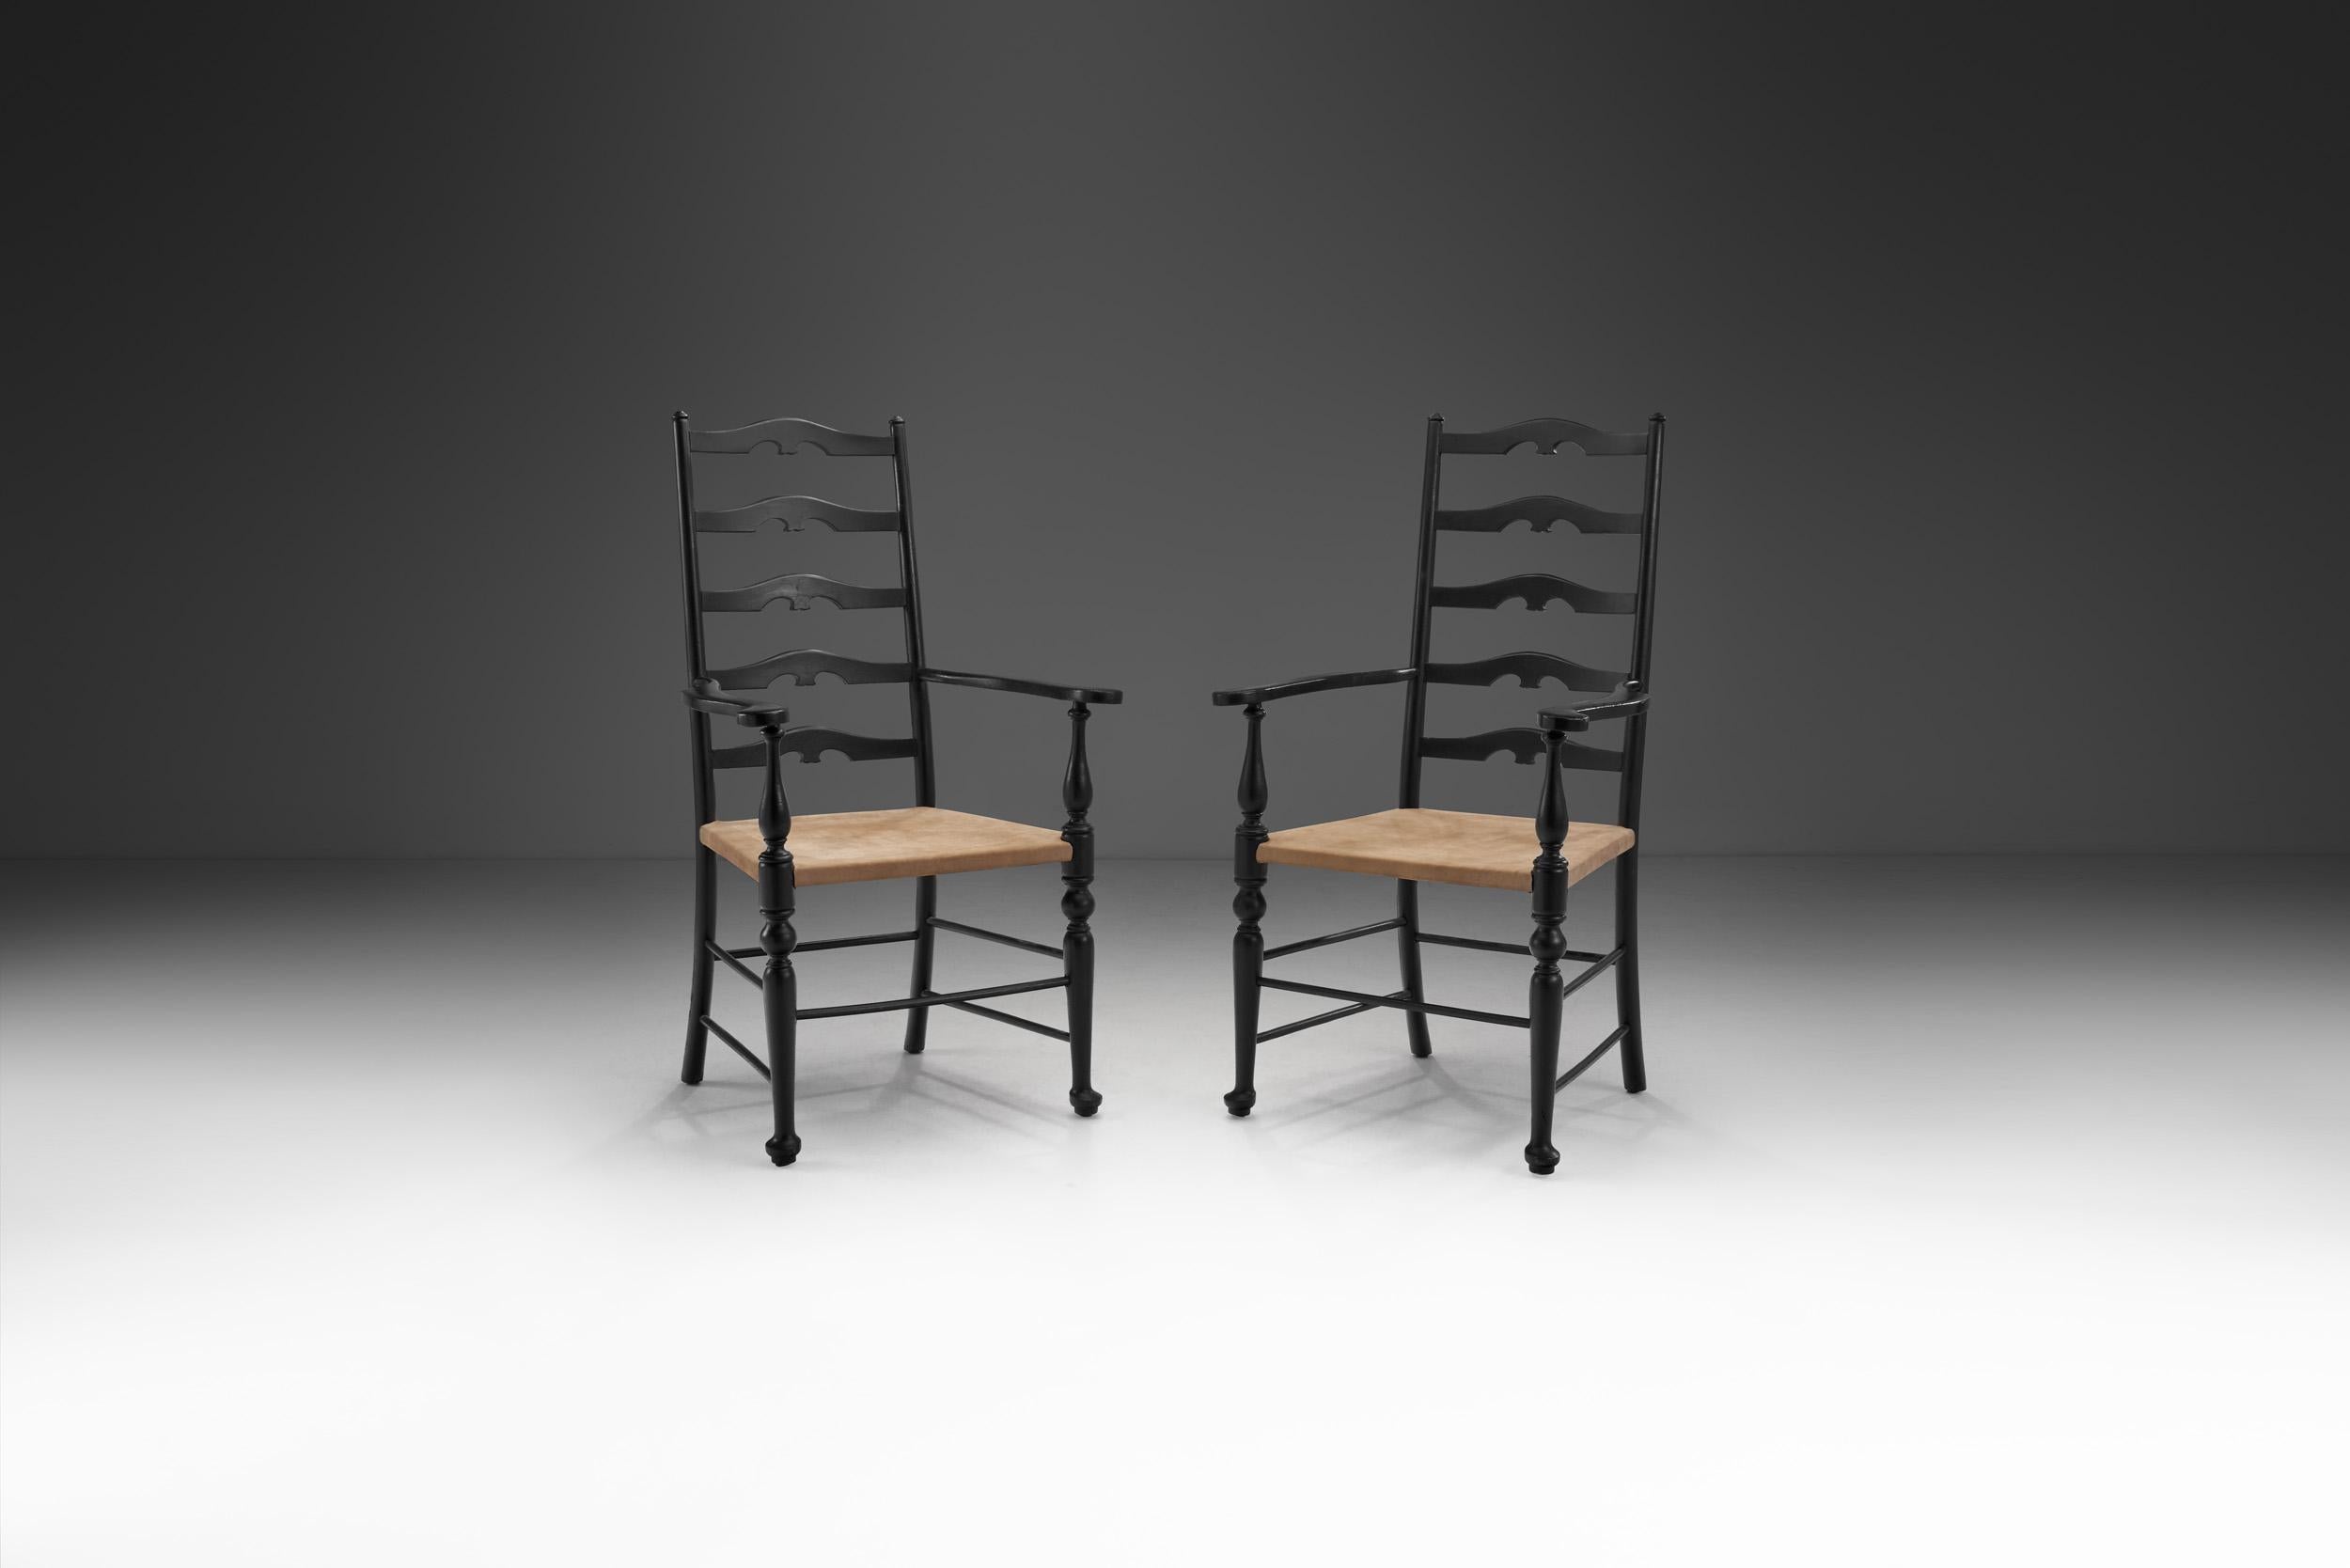 This beautiful early midcentury pair of carver chairs combines historic elements with an organic design. Using natural materials and traditional techniques, the resulting aesthetic is timeless and ever eye-catching.

Carver chairs like these have